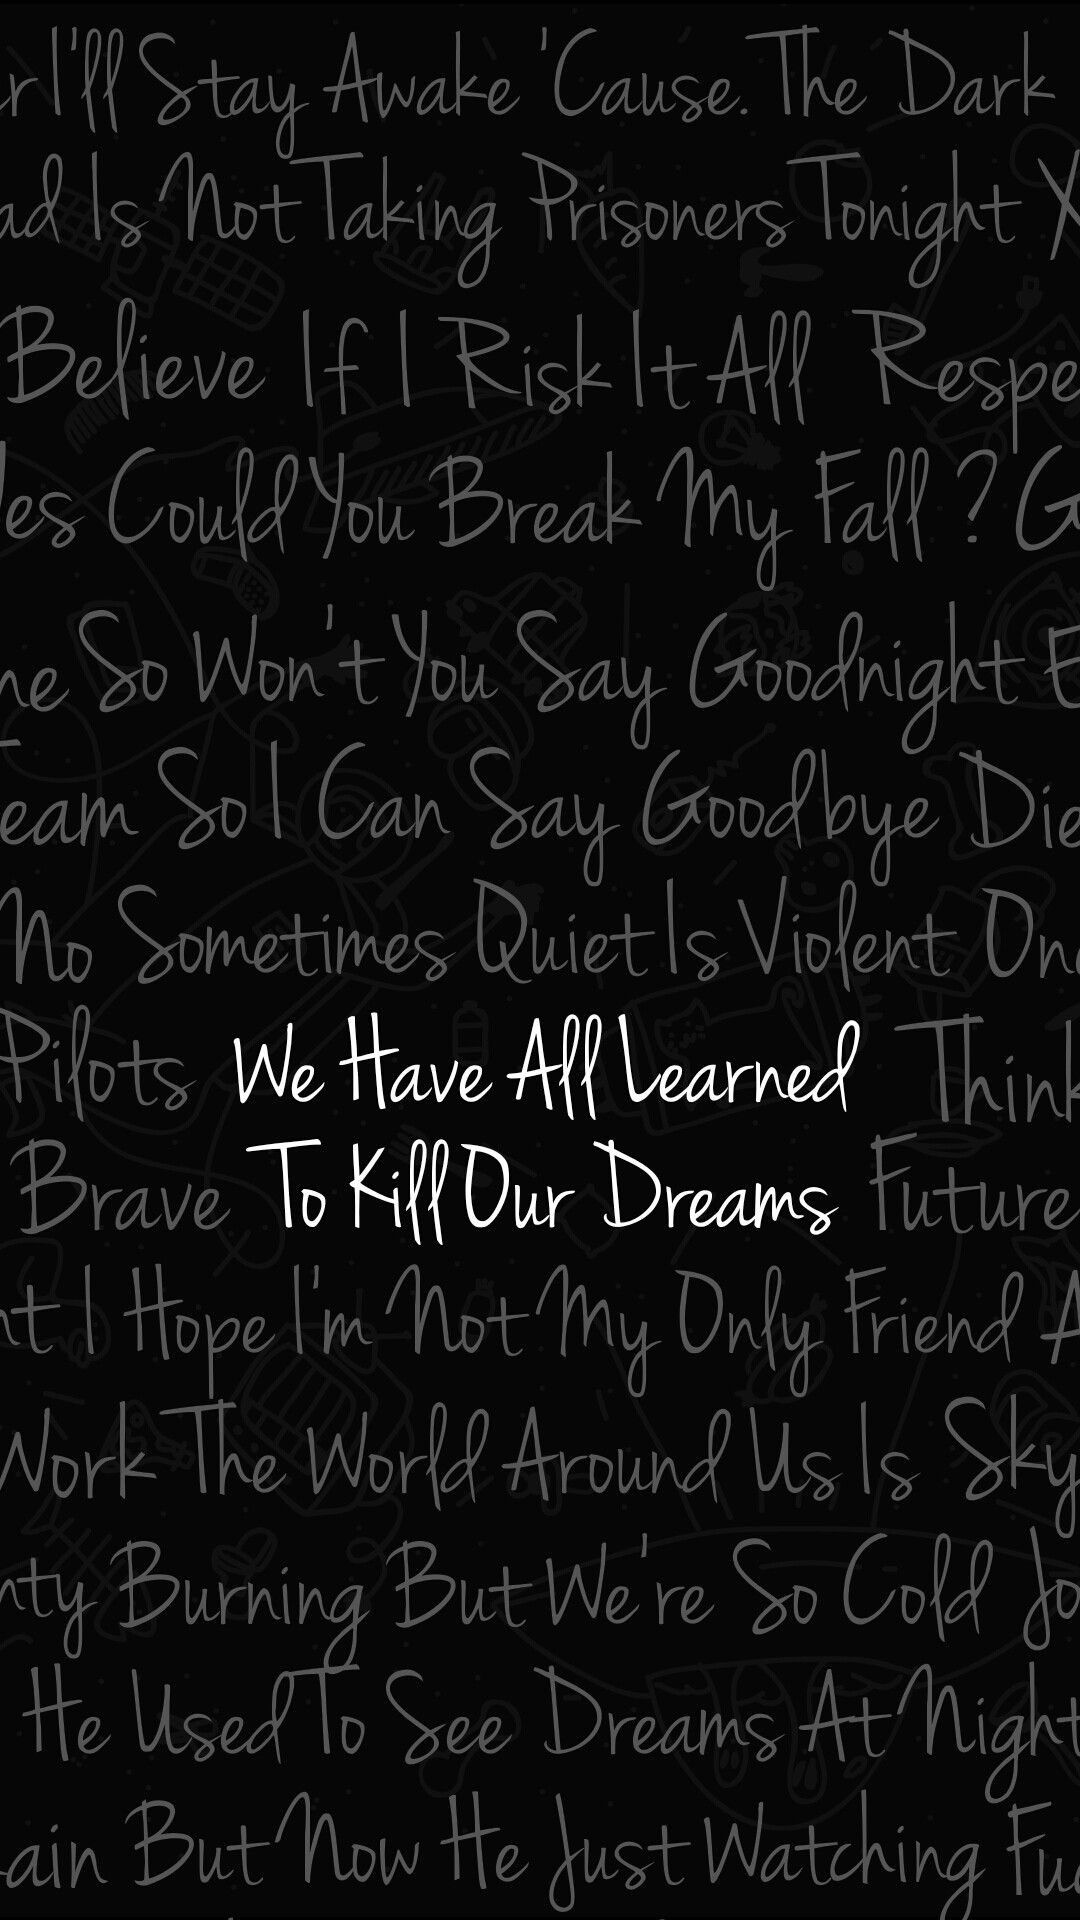 We have all learned to kill our dreams - Emo